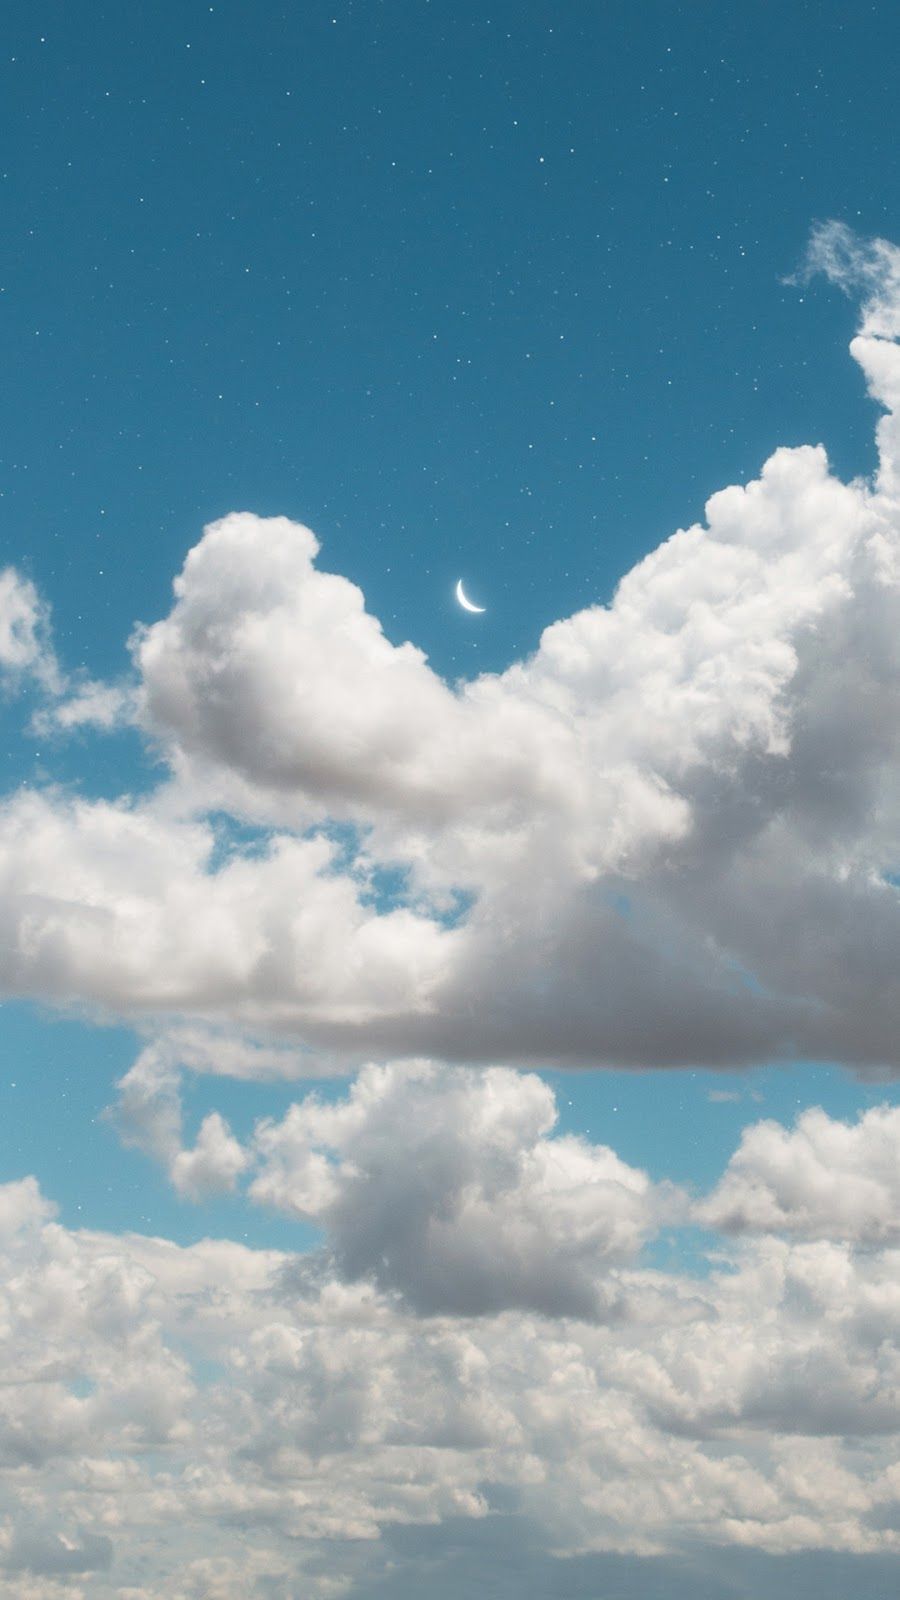 Crescent moon in the blue sky. Sky aesthetic, Blue sky wallpaper, Beautiful wallpaper background